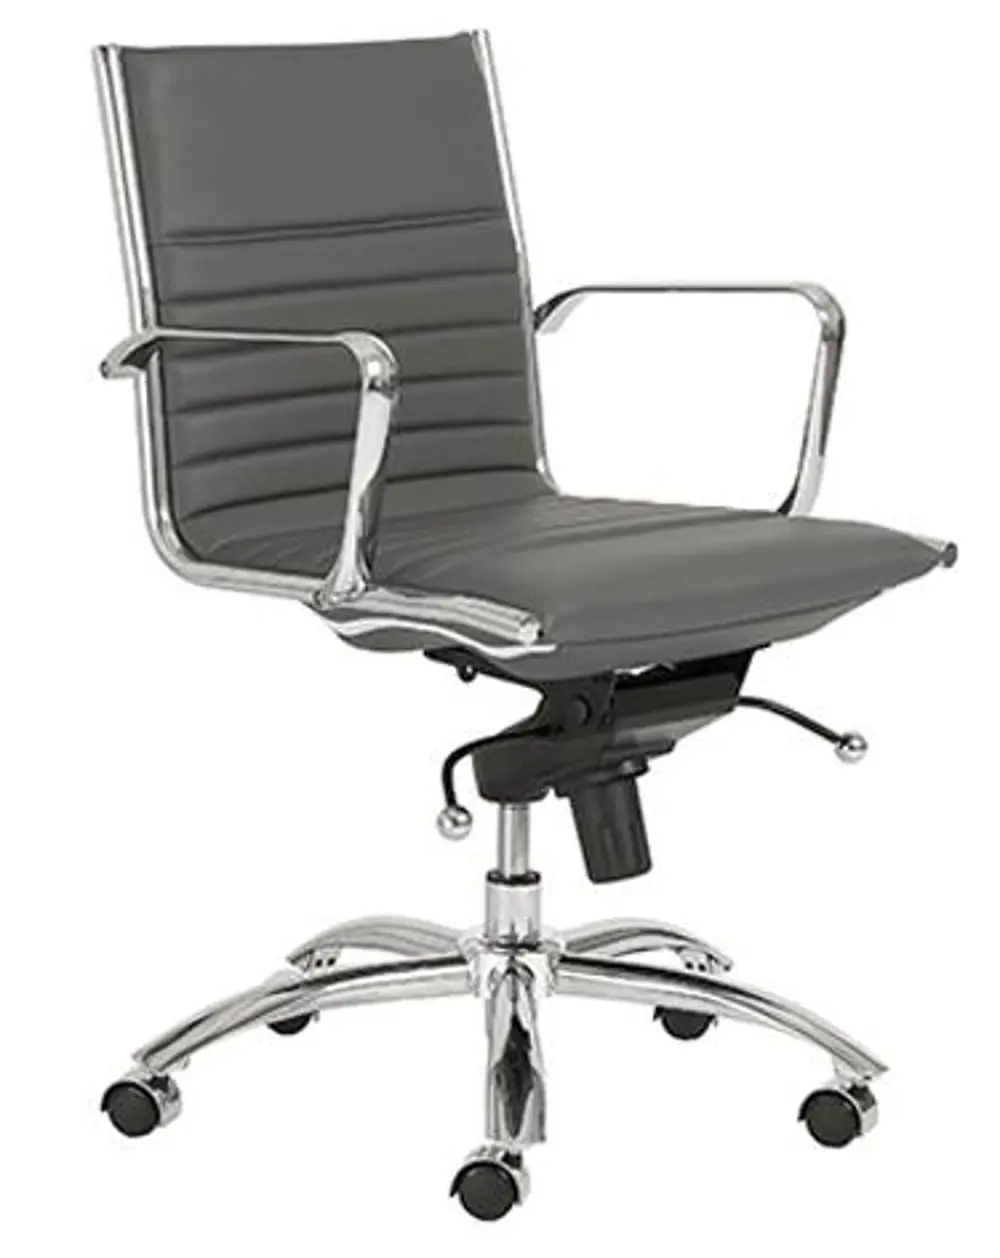 Gray Low-Back Office Chair - Dirk -1